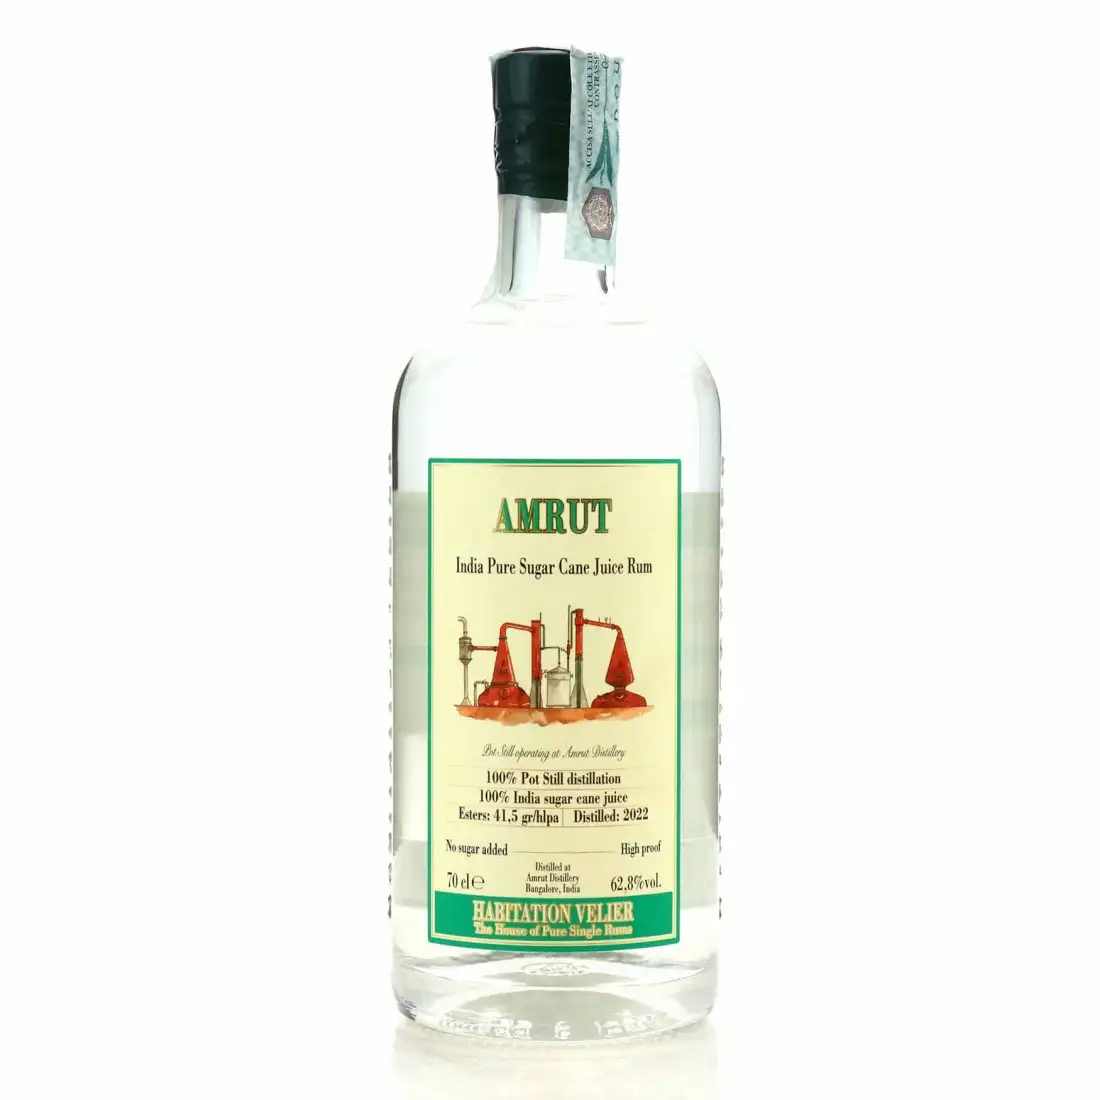 Image of the front of the bottle of the rum India Pure Sugar Cane Juice Rum